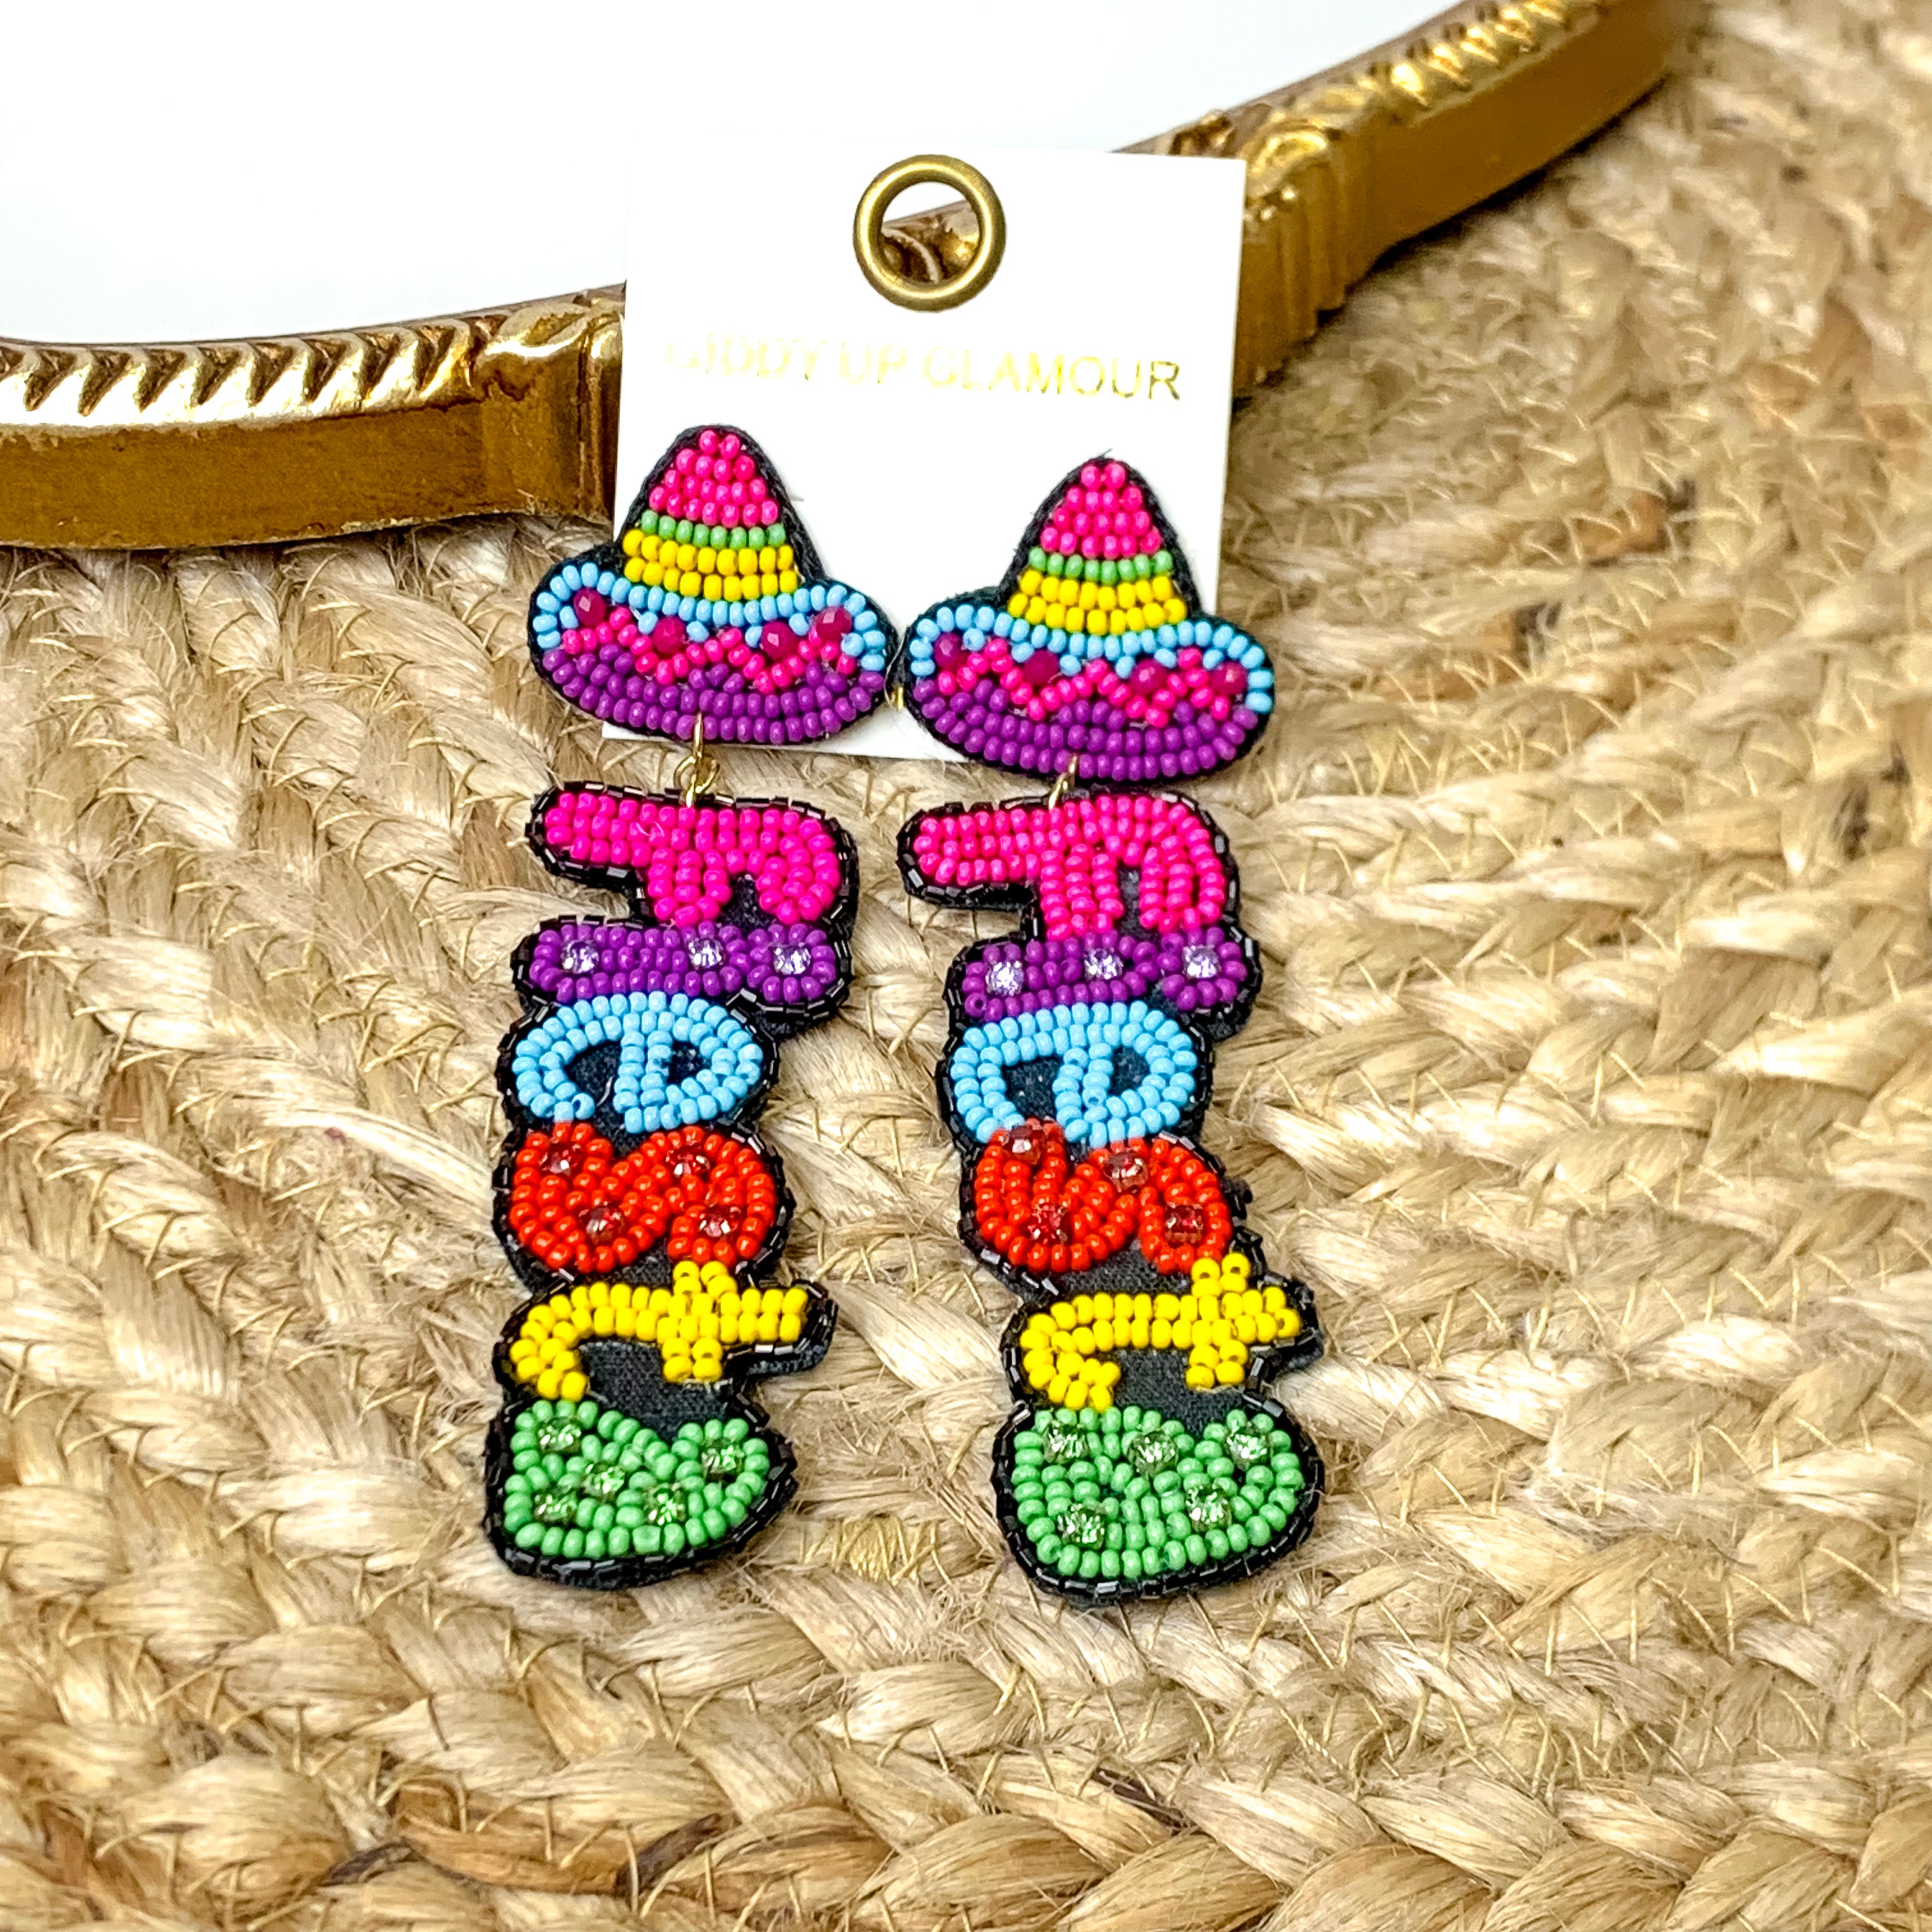 Sombrero Fiesta Seed Beaded Earrings in Multicolored - Giddy Up Glamour Boutique